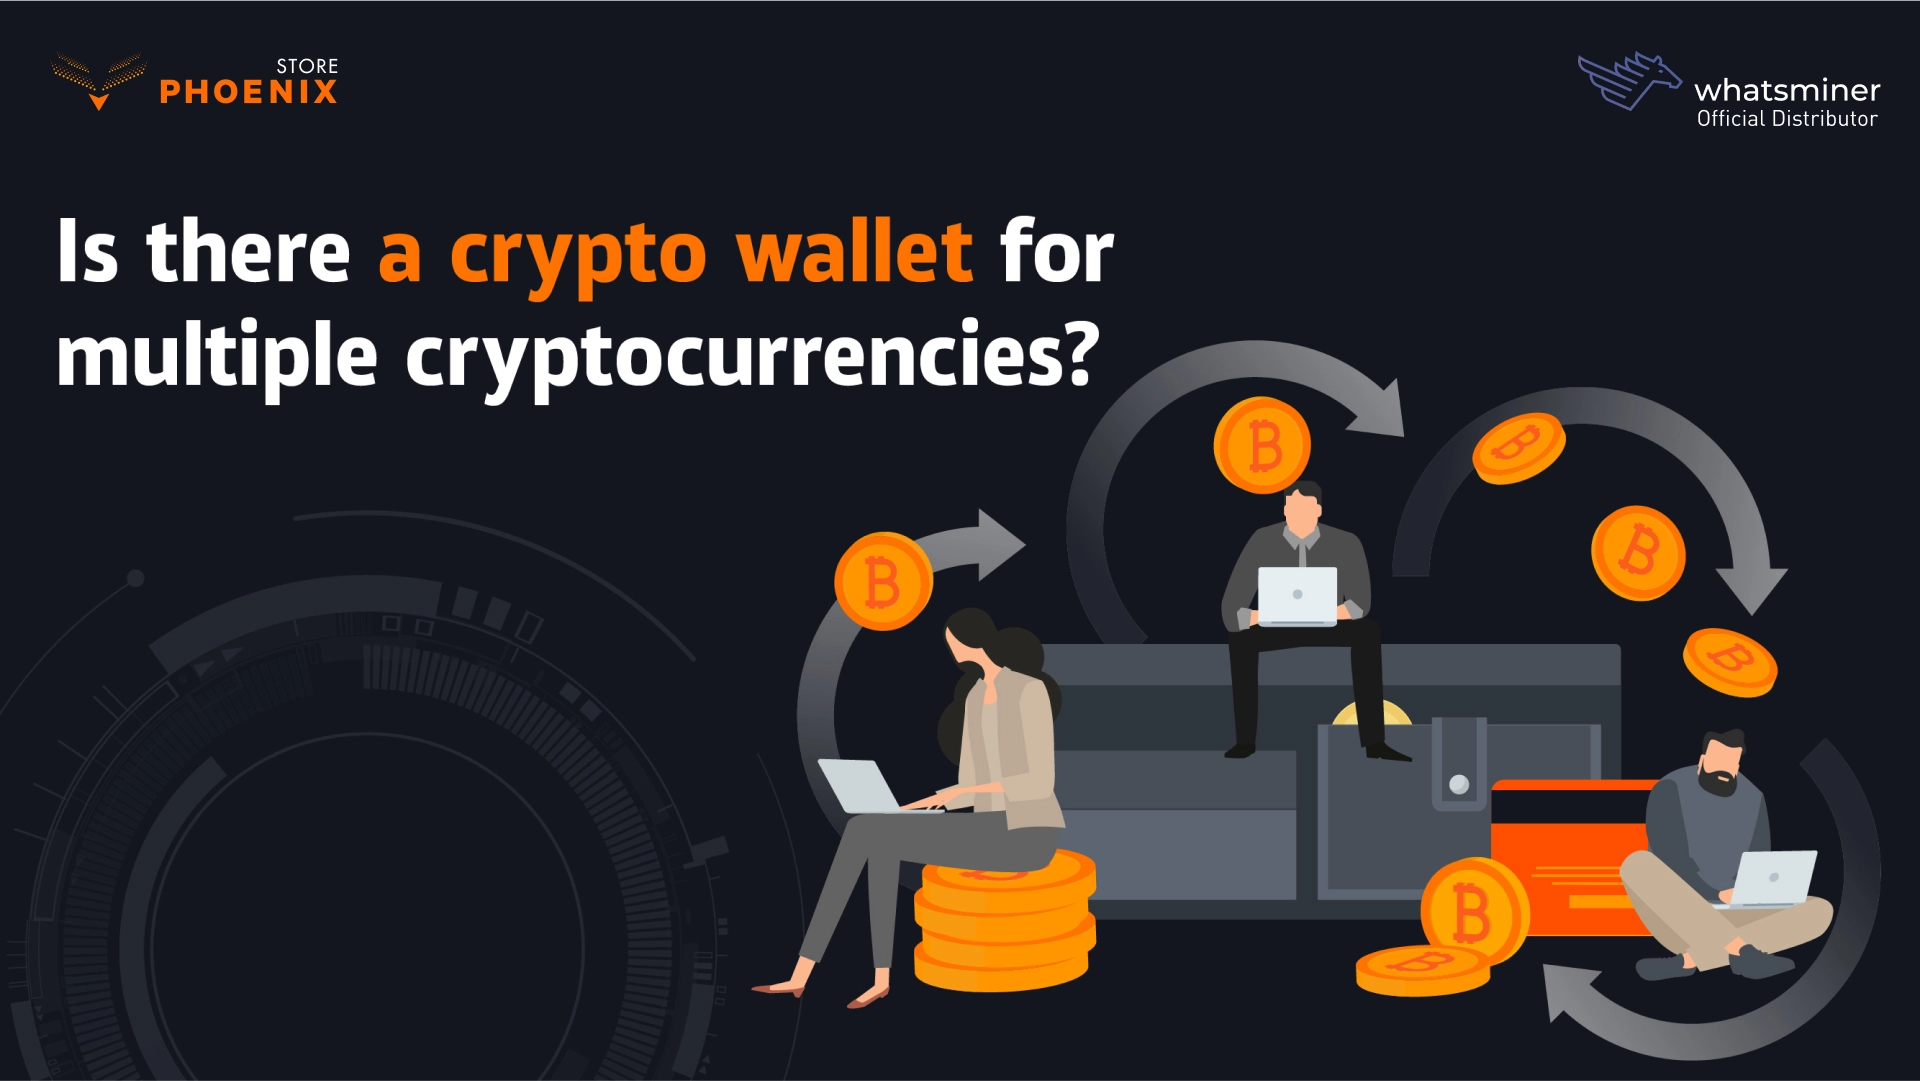 Is There a Crypto Wallet for Multiple Cryptocurrencies?